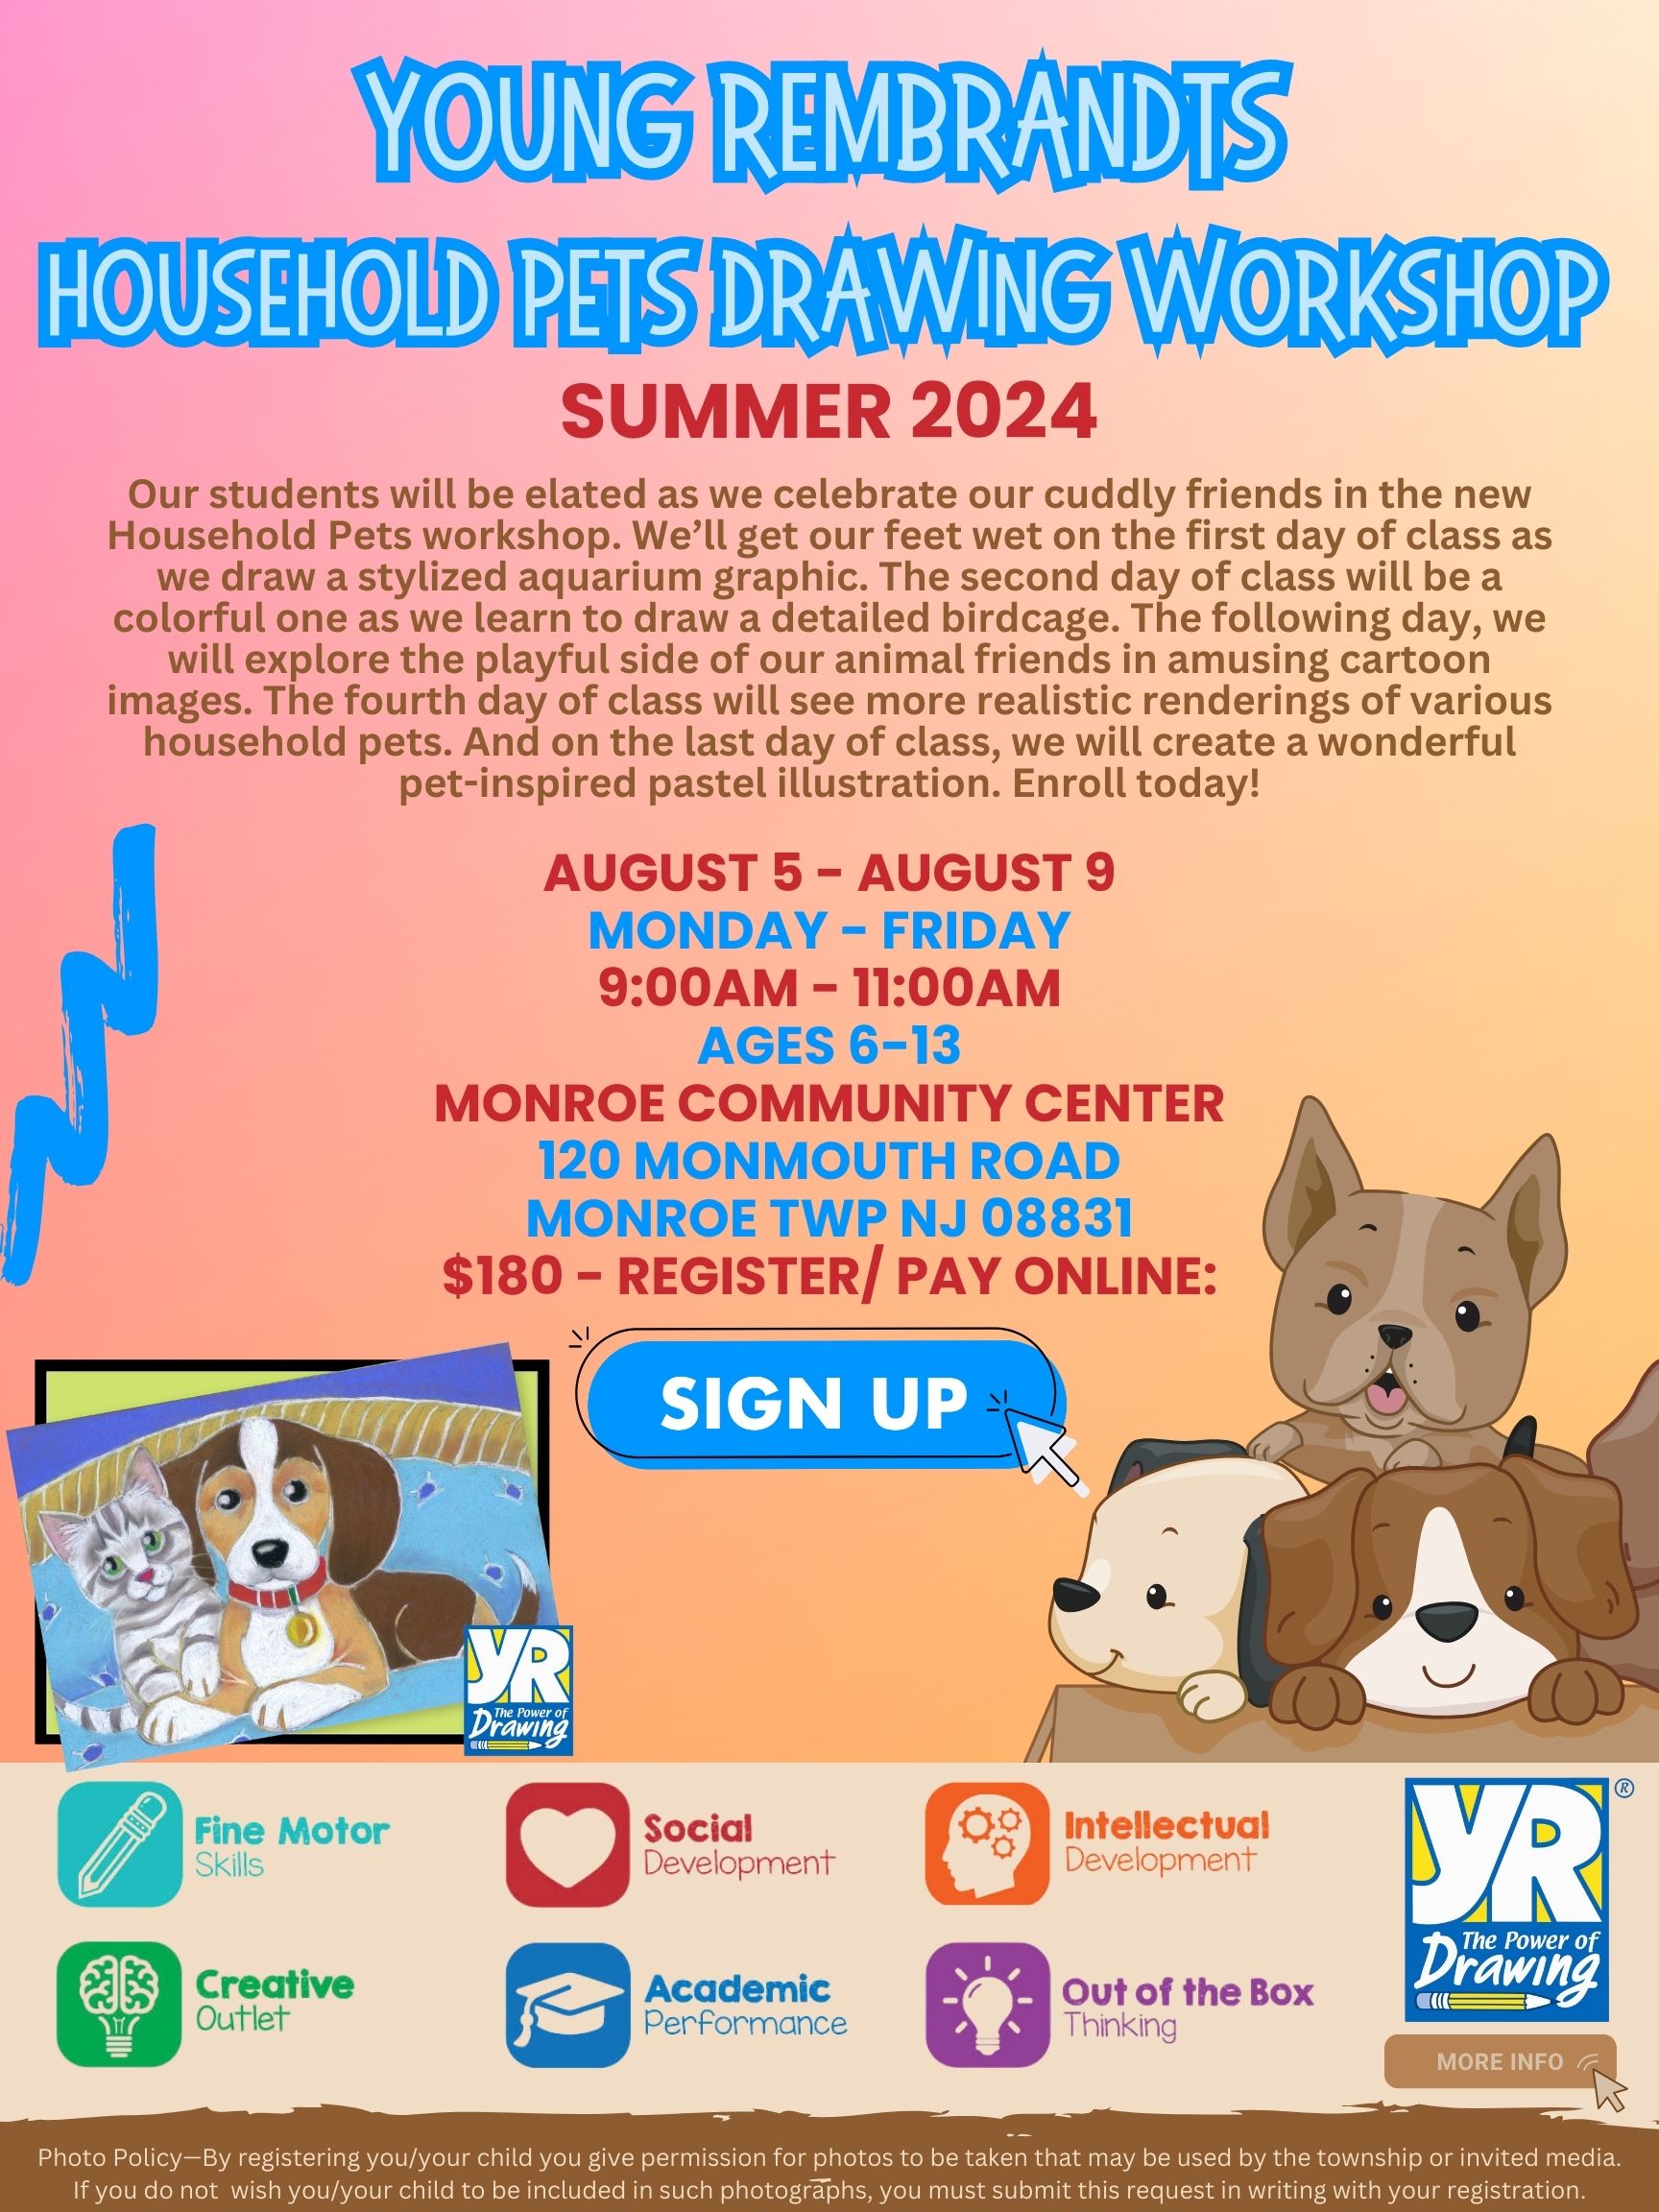 YOUNG REMBRANDTS DAY WORKSHOP SUMMER 2024